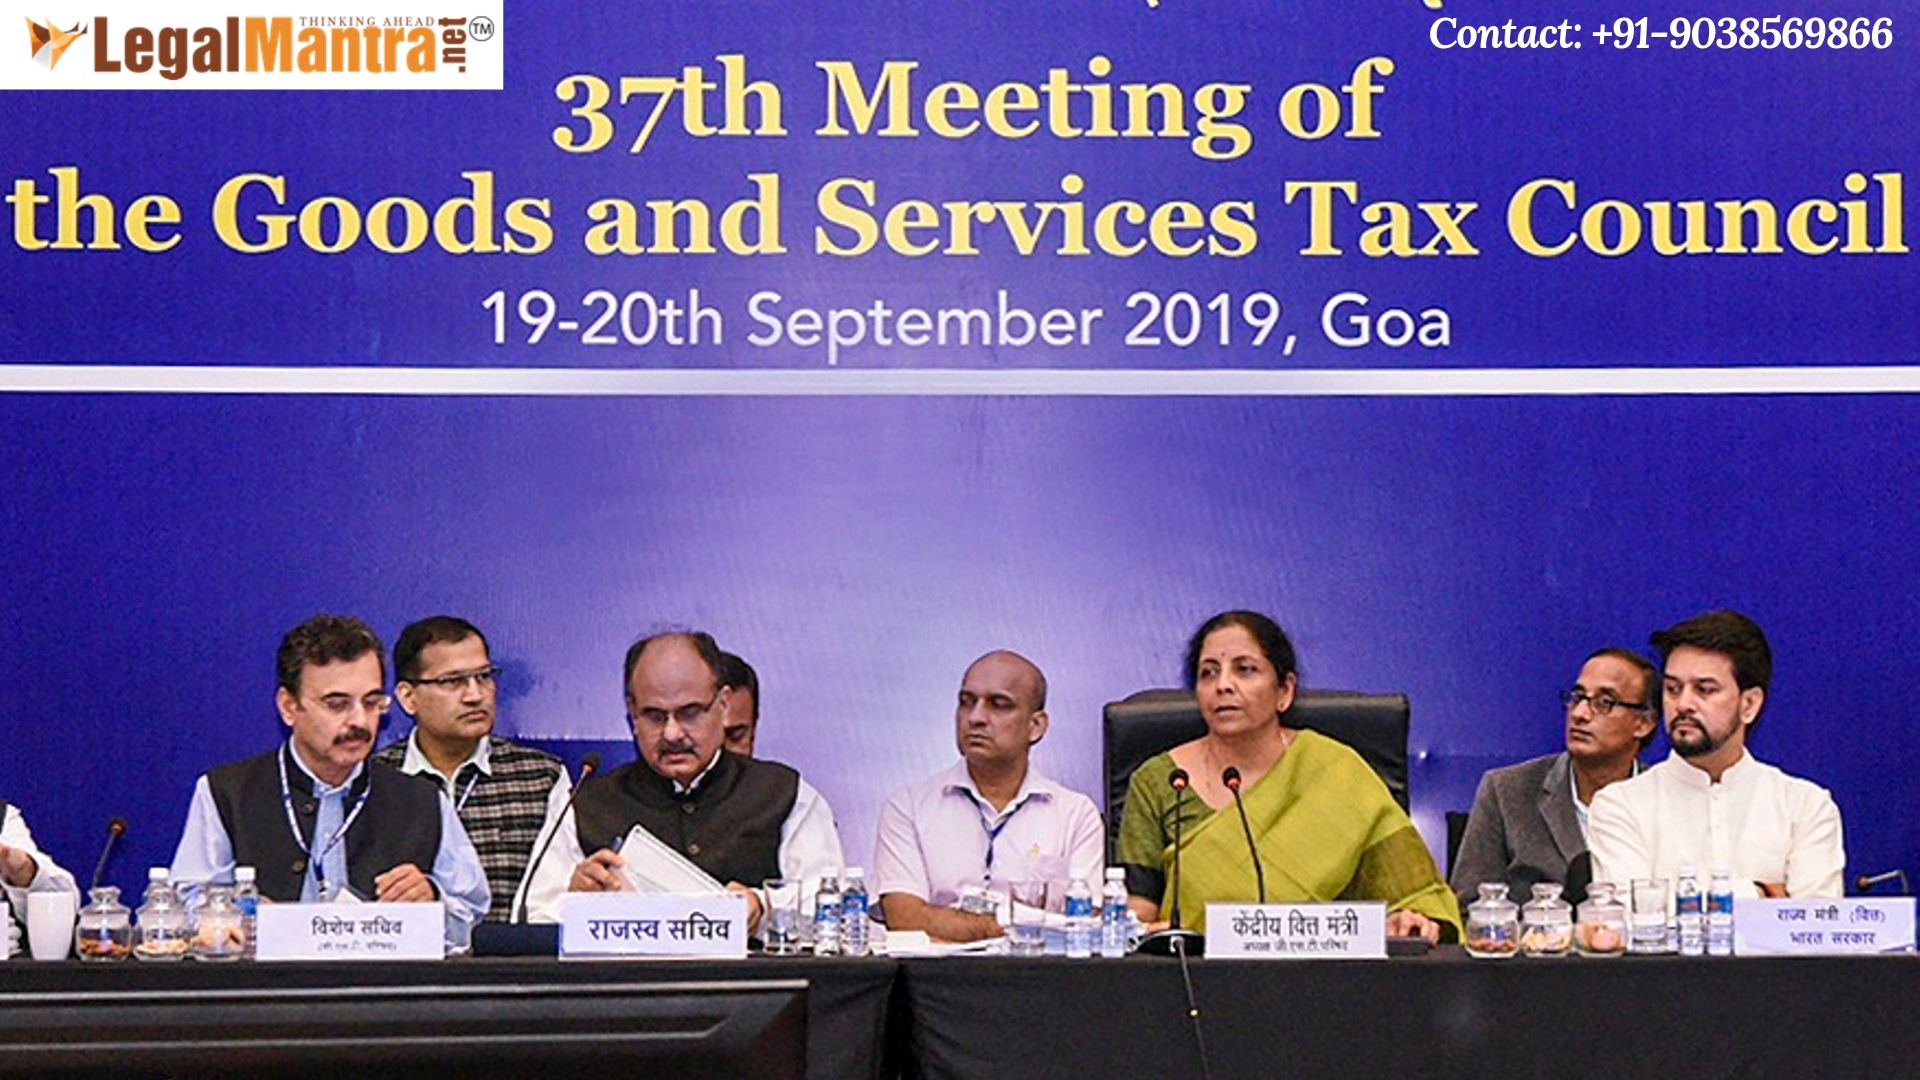 GST Rate on Goods as recommended by the GST Council in its 37th Meeting